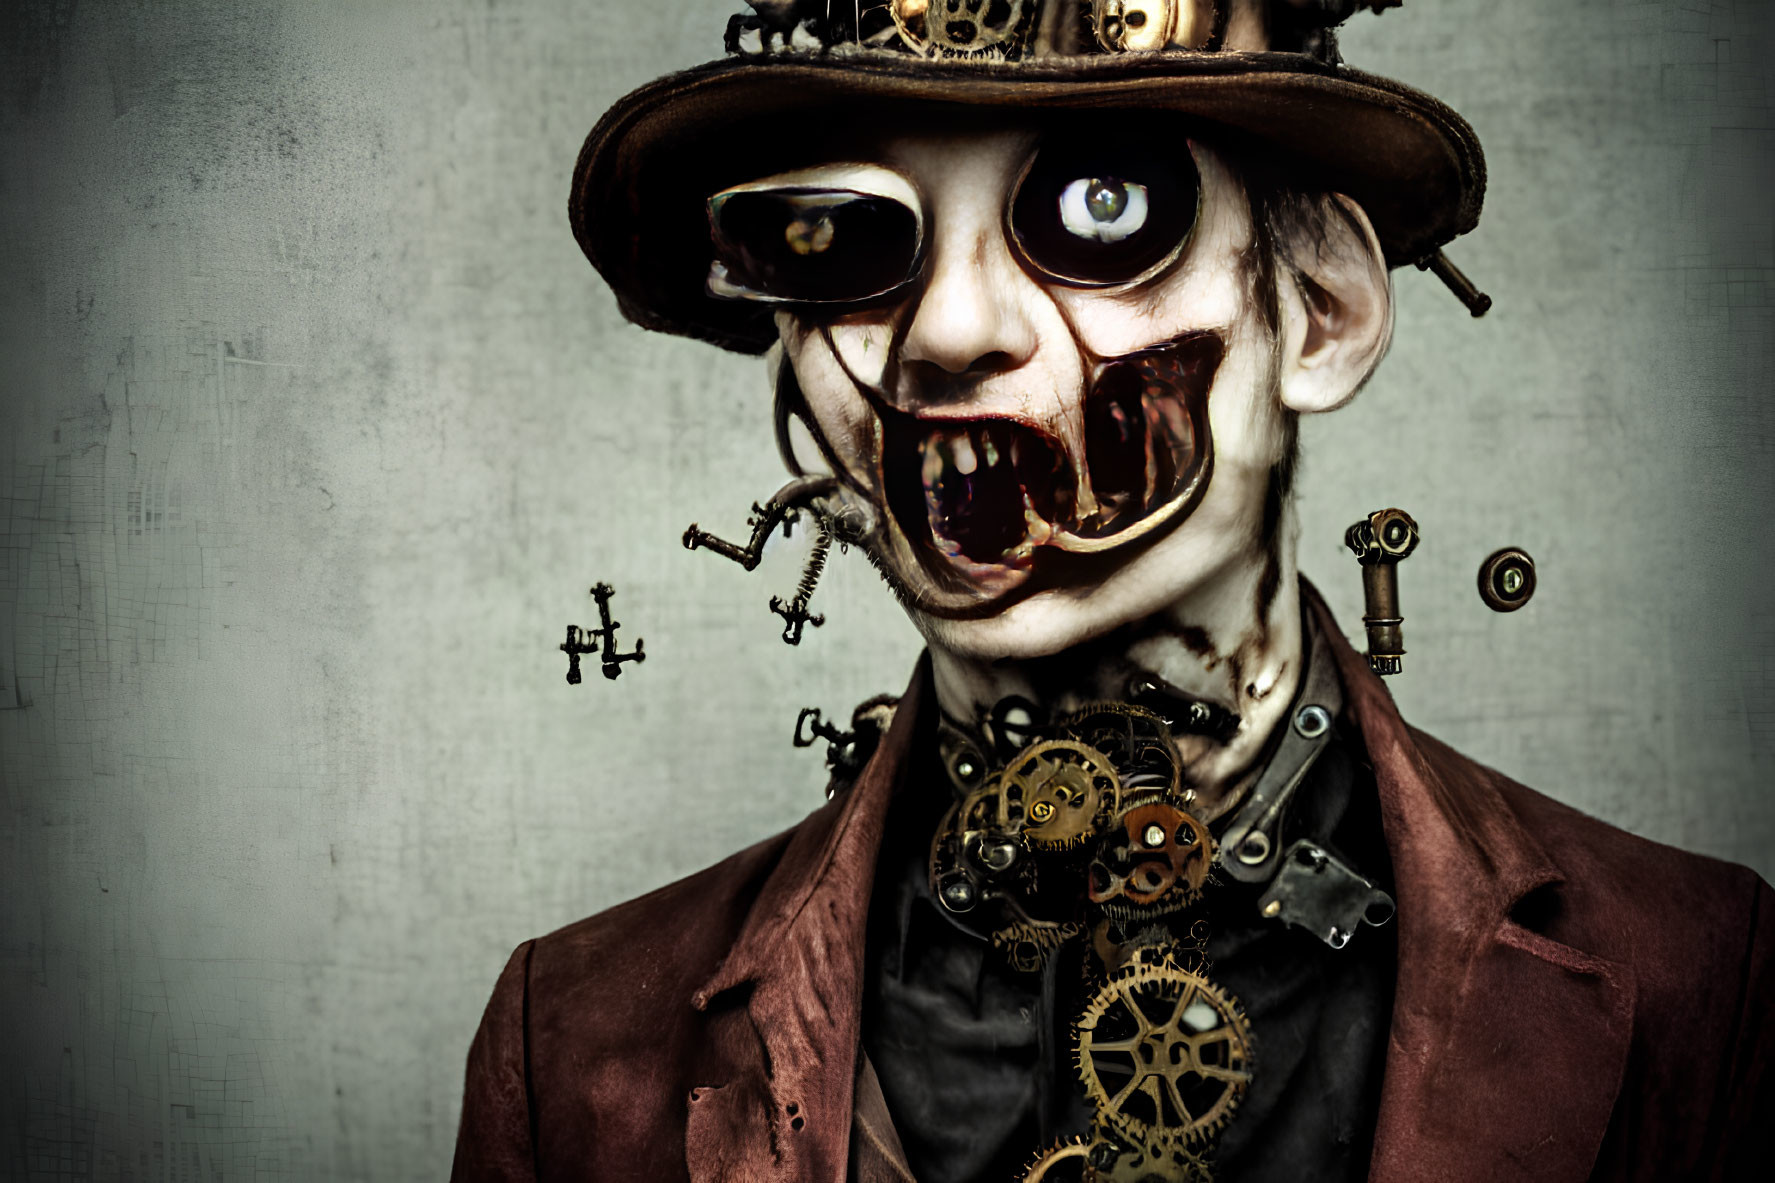 Steampunk-inspired character with mechanical eyes and jaw, vintage suit, and top hat on textured background